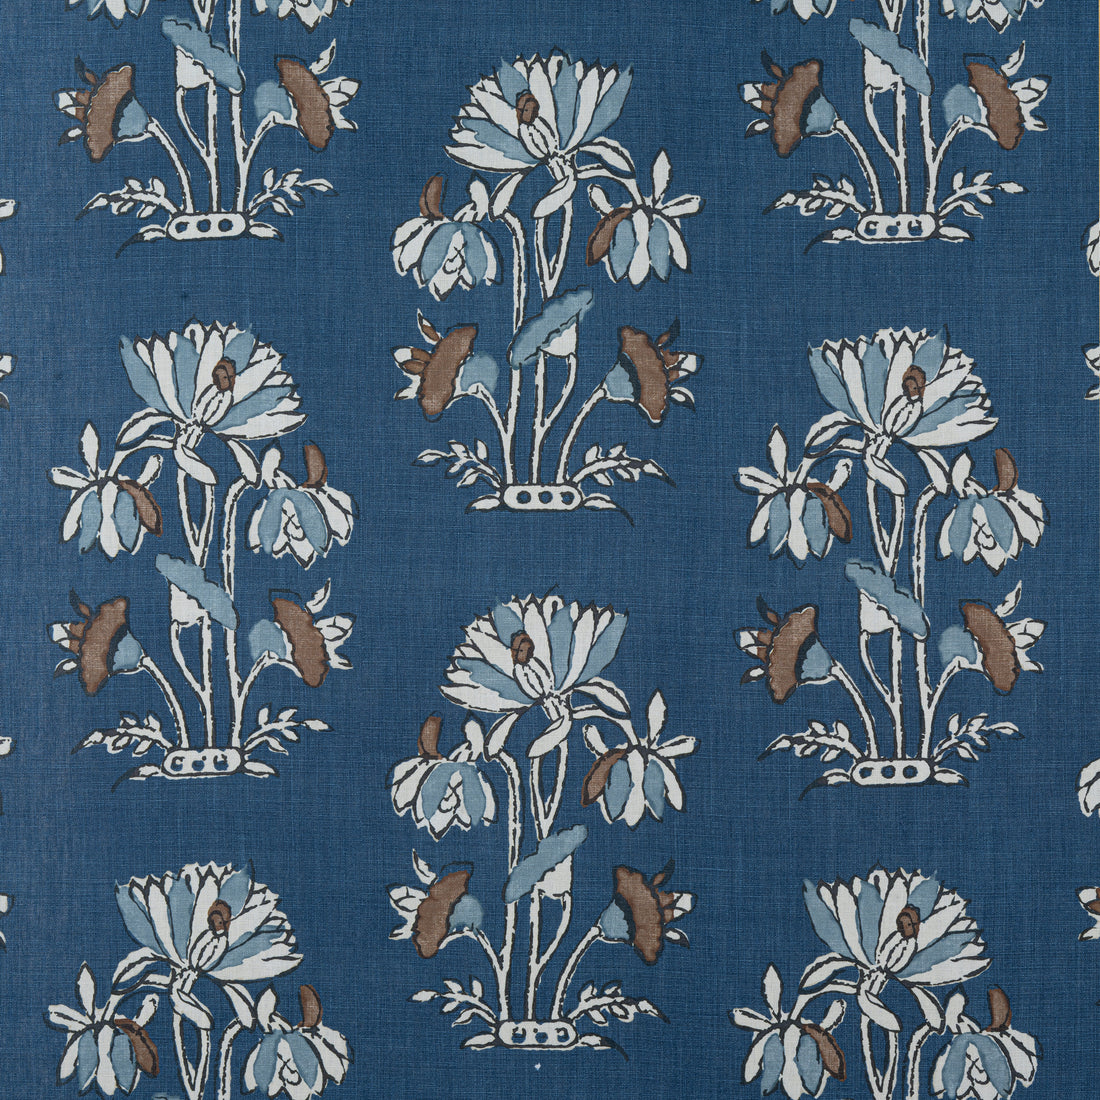 Lily Flower fabric in navy color - pattern number F913203 - by Thibaut in the Mesa collection